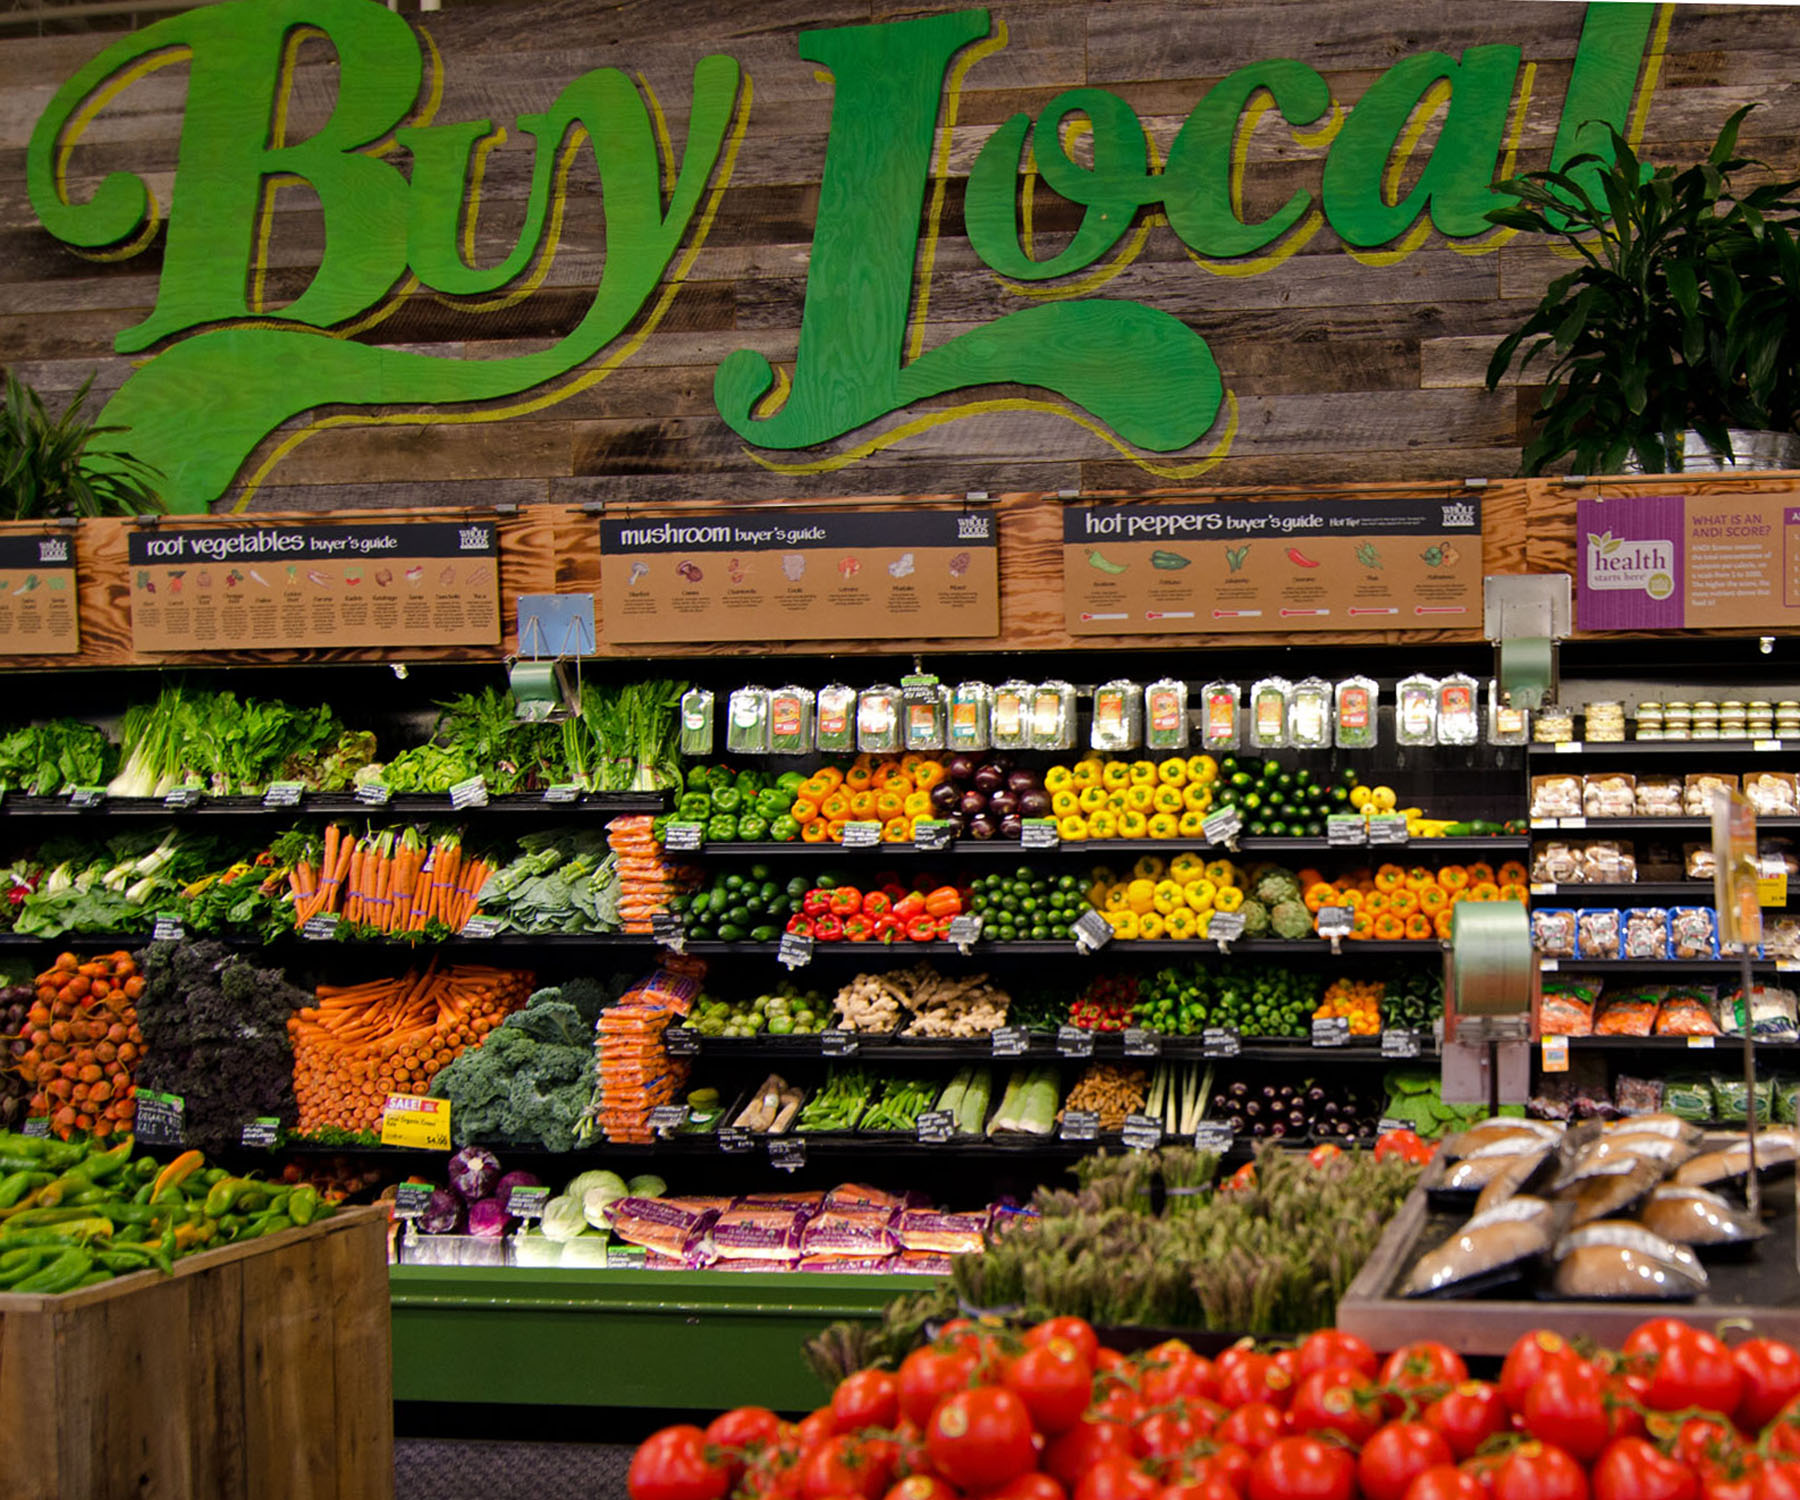 Whole Foods Market is one of many grocery stores open on New Year's Eve this year. (Whole Foods)